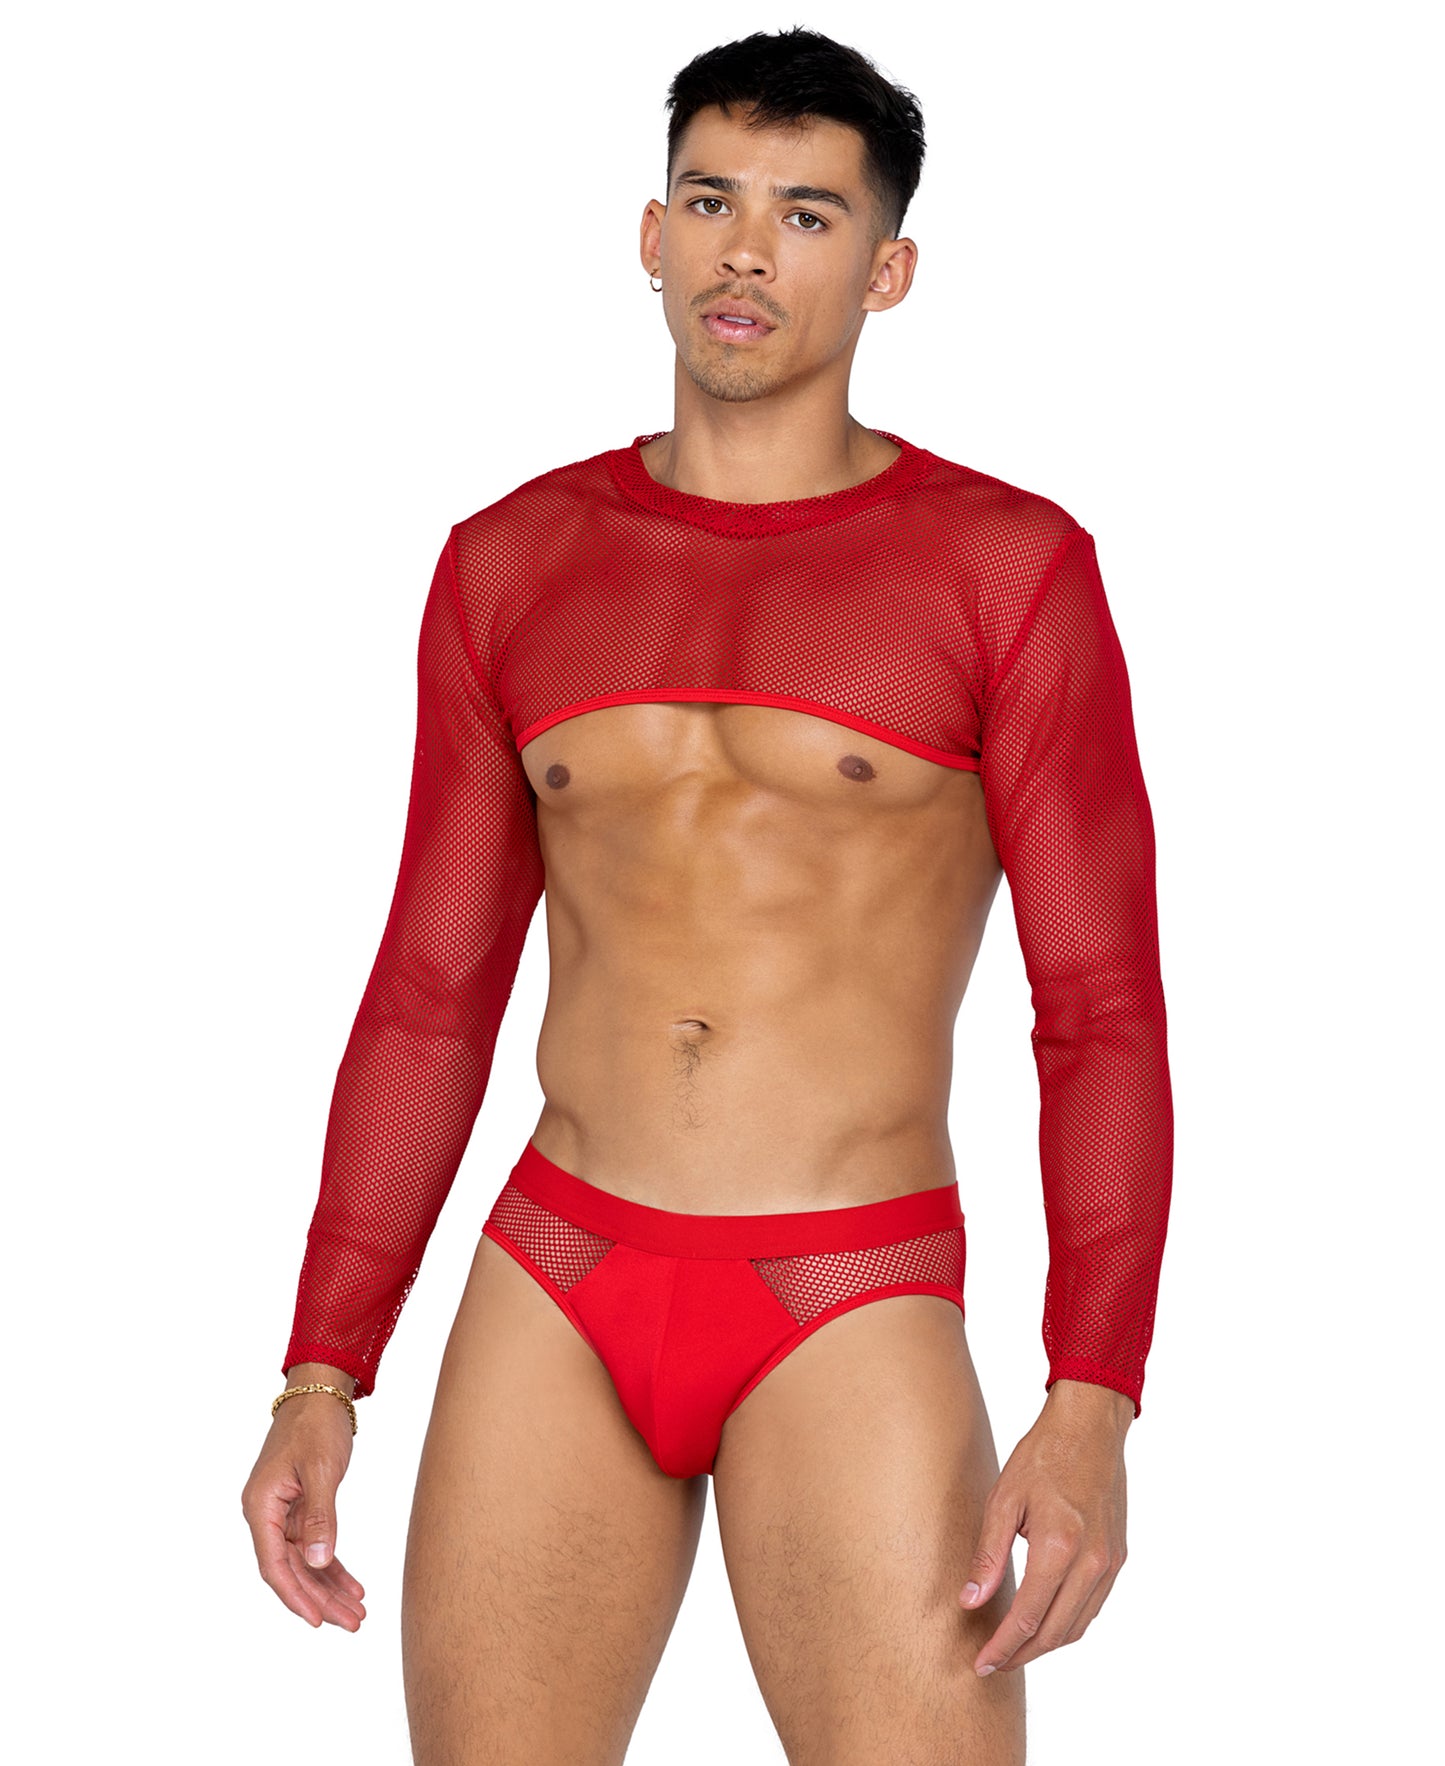 LI589 X-Posed Crop Top Red front view